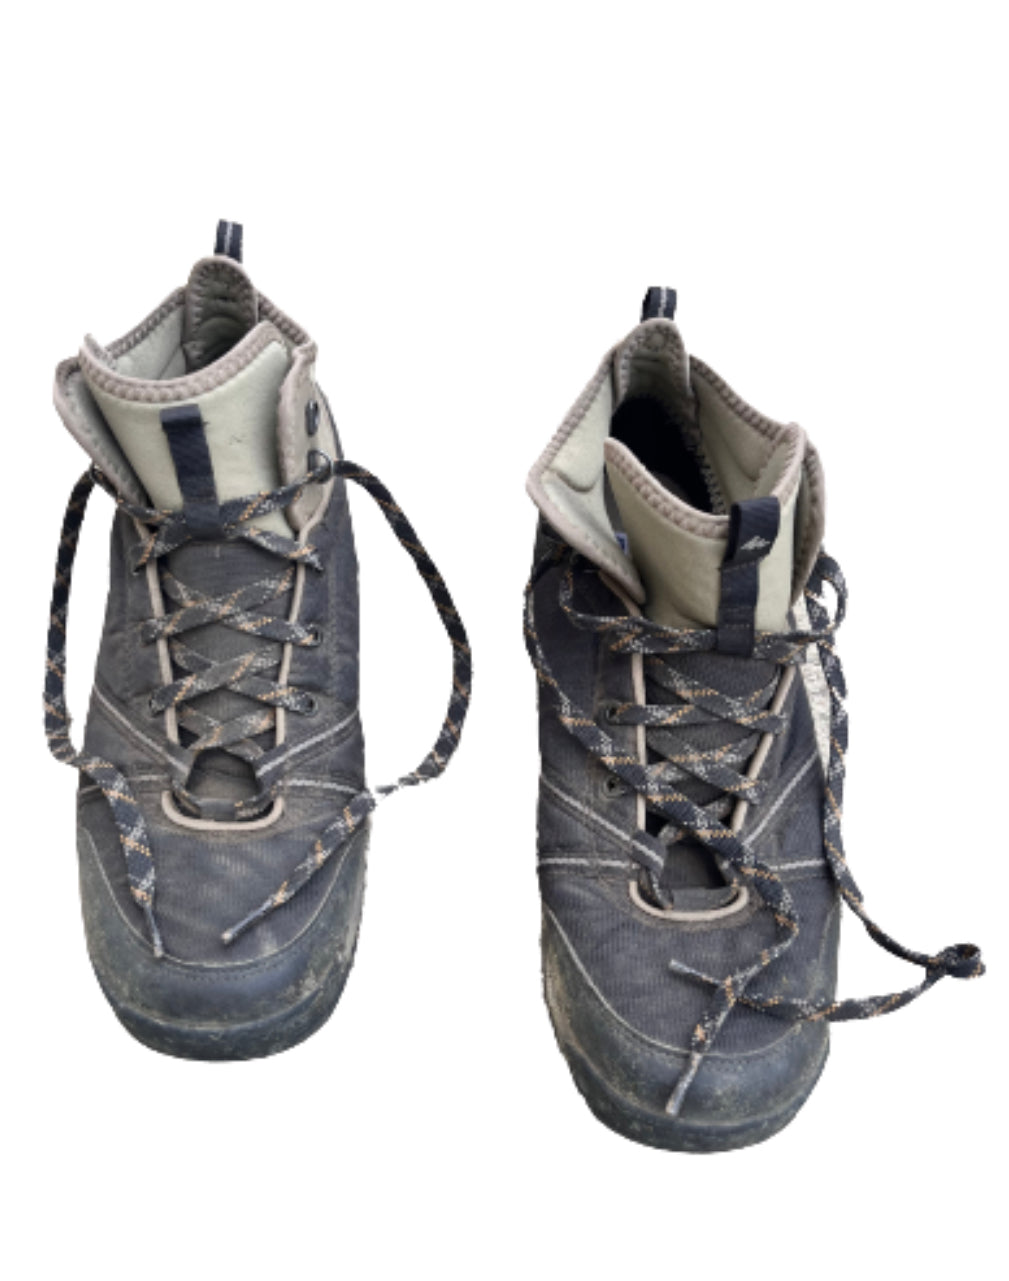 WRATH OF MAN MOVIE: John’s Tactical/Hiking Boots (10)